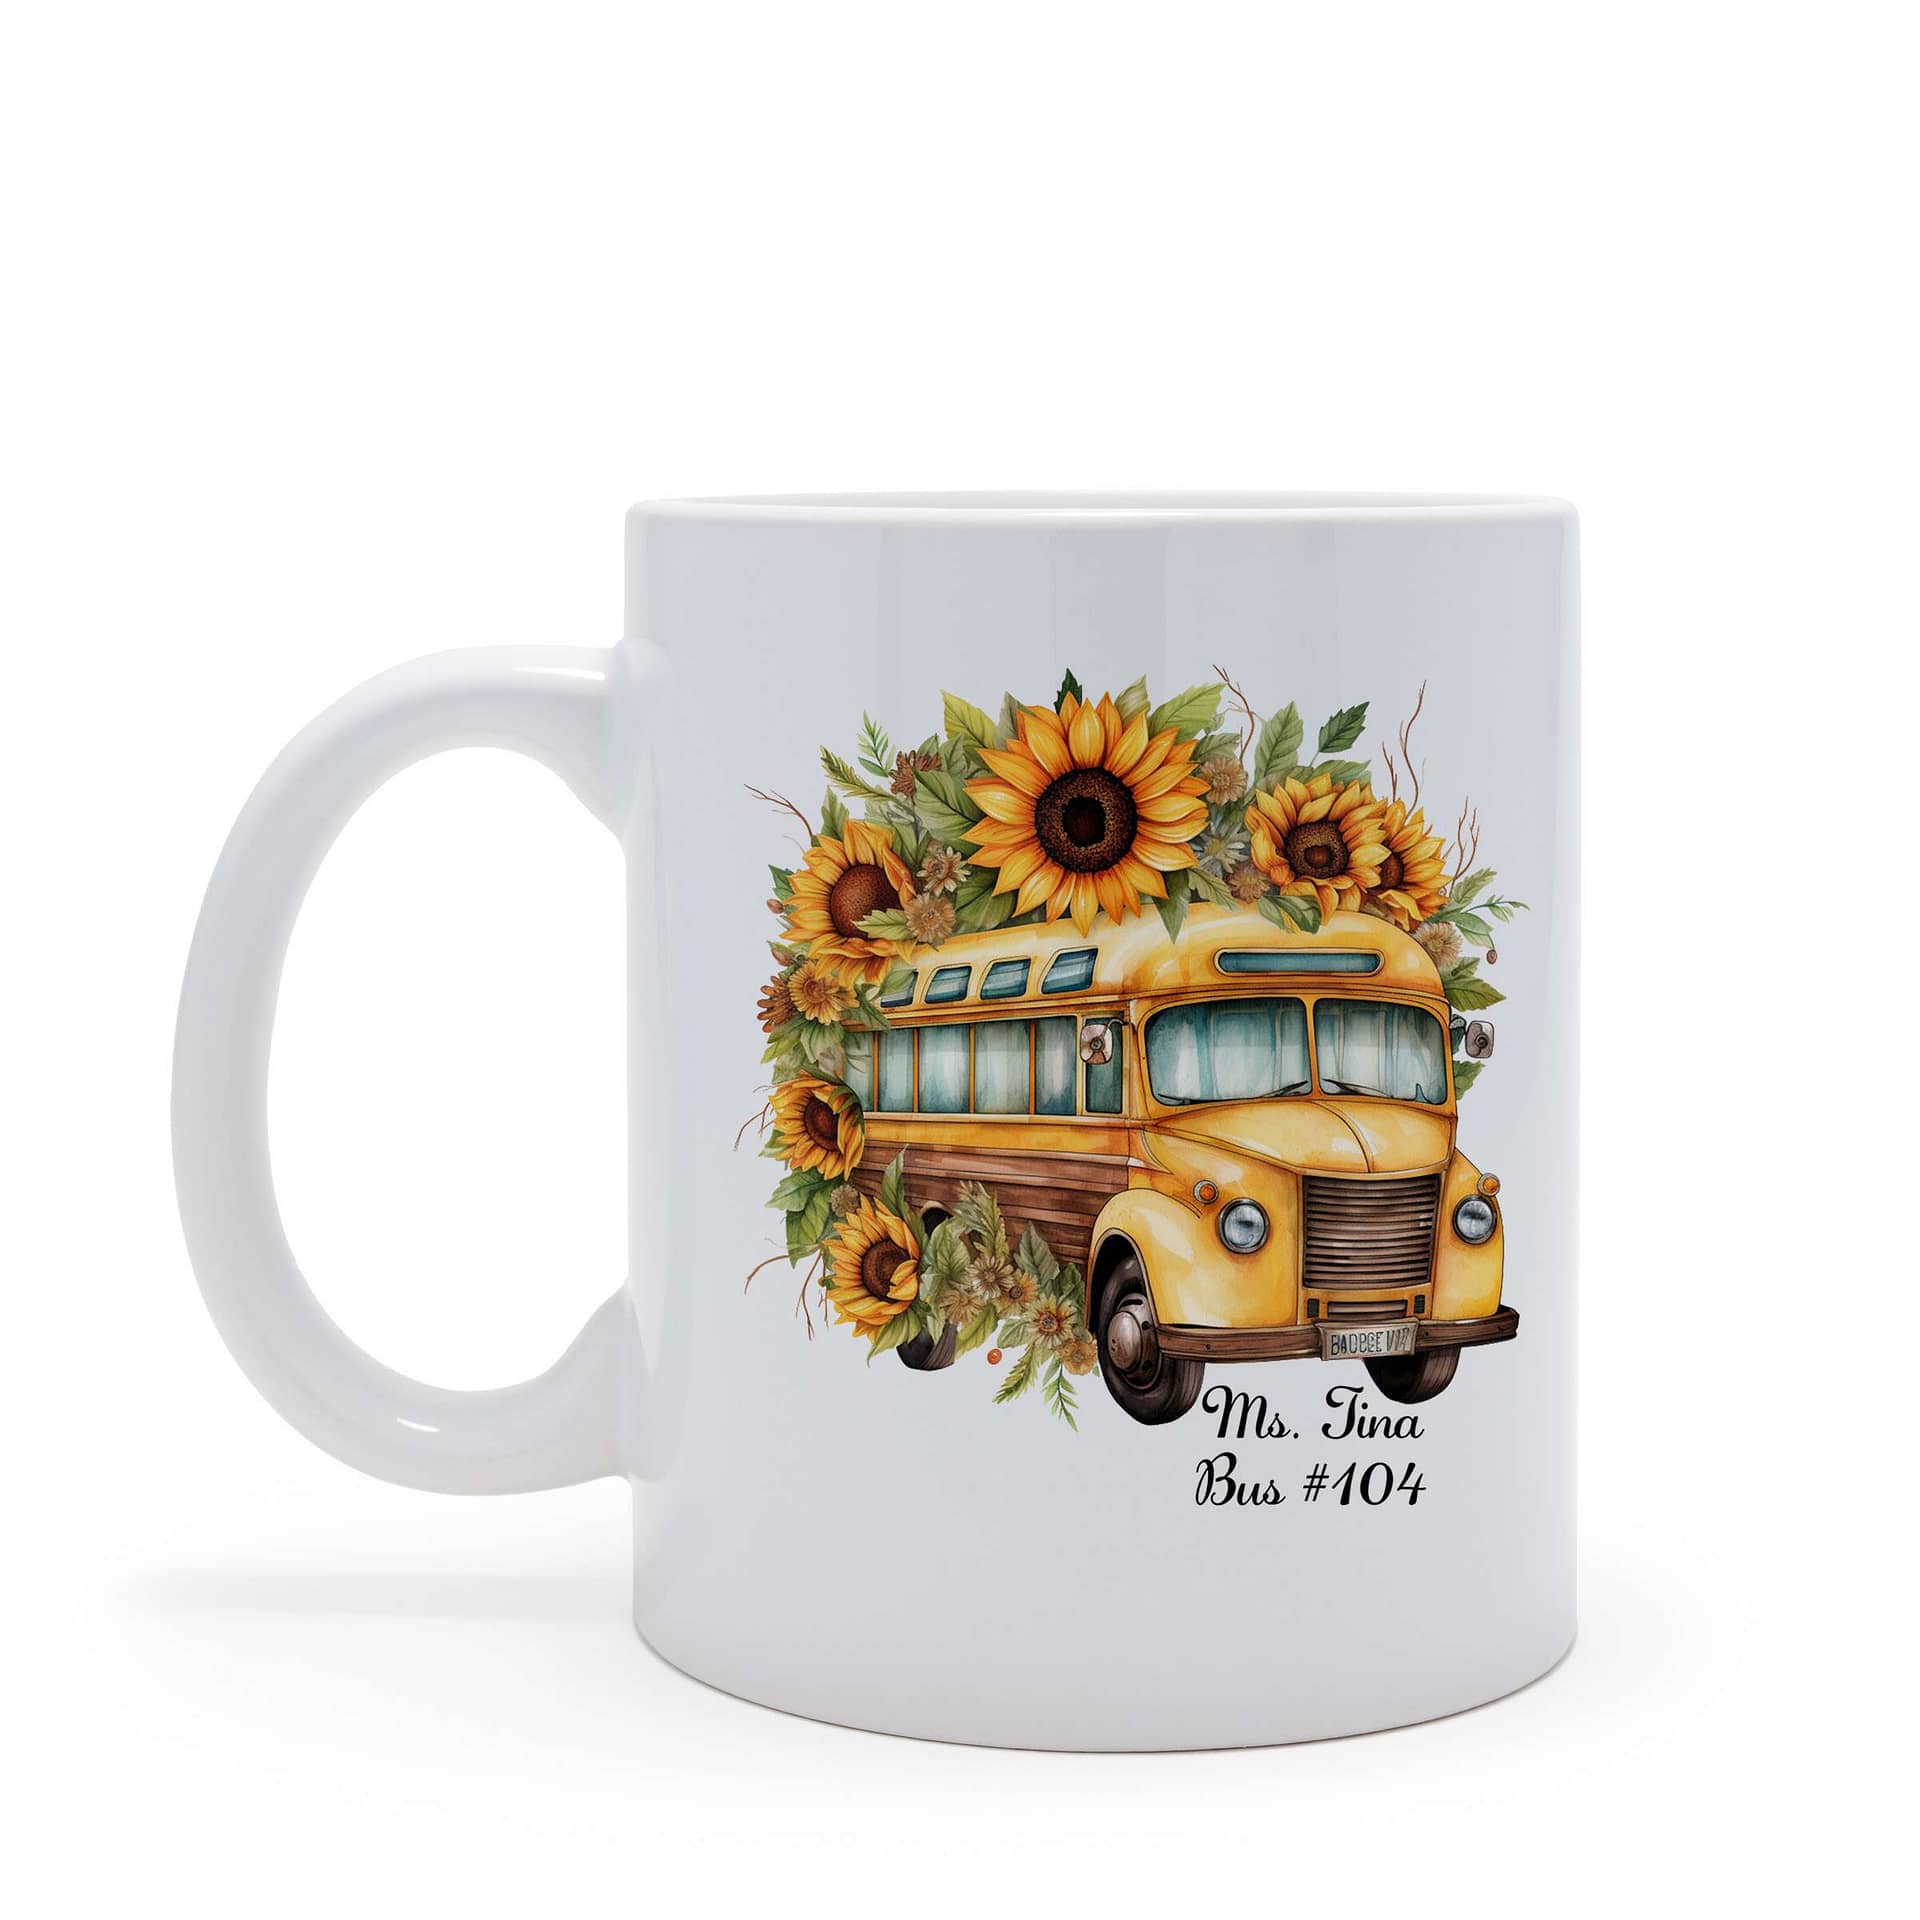 Best Bus Driver Tumbler - Personalized Insulated Tumbler